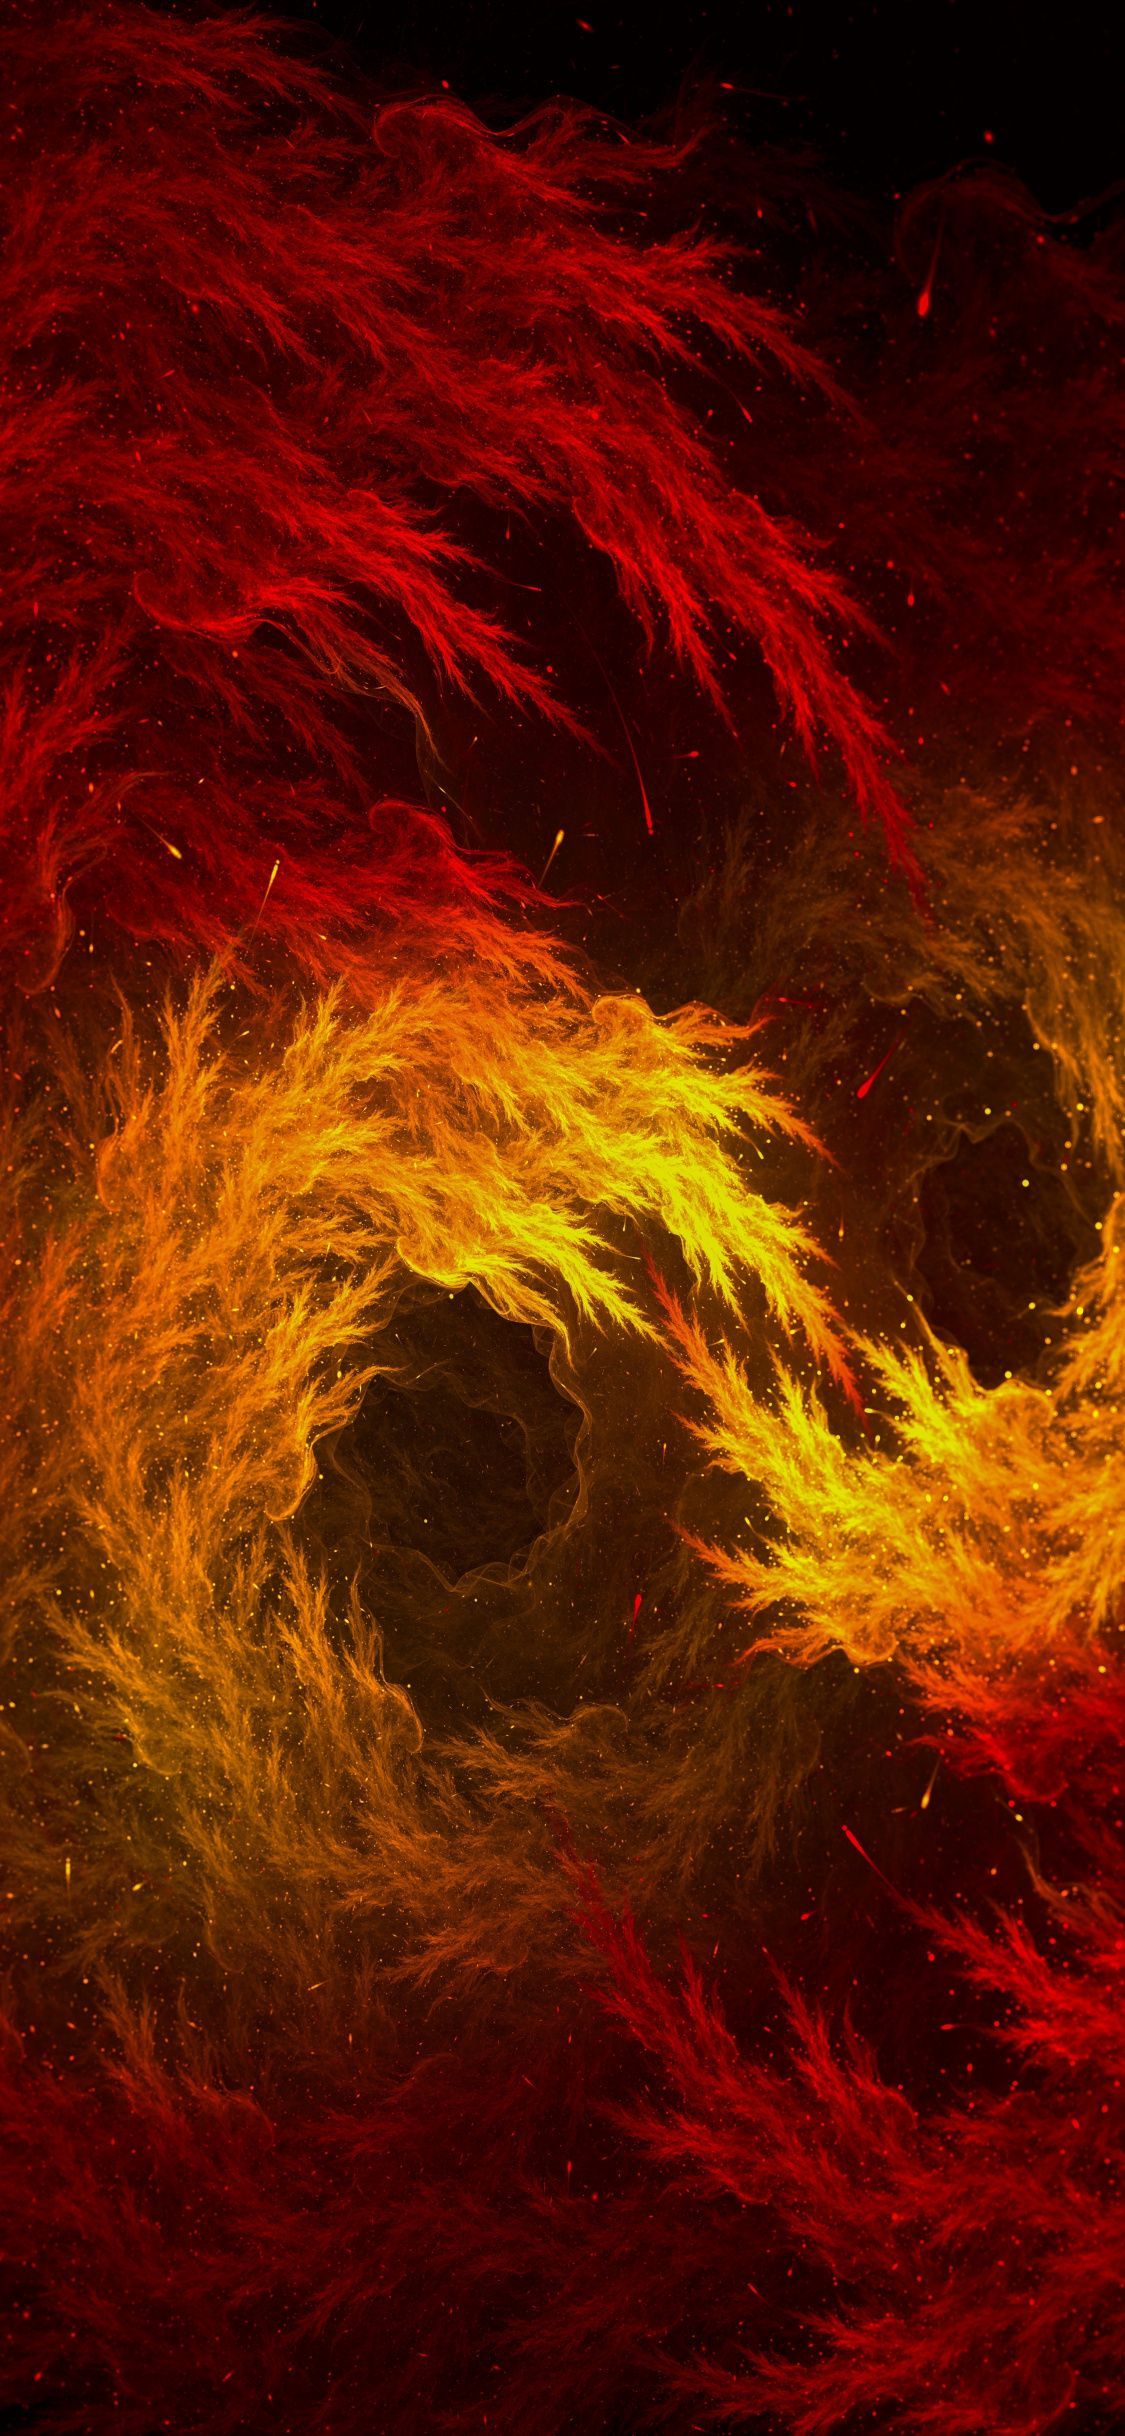 Fractal, Red Yellow Flame, Sparks, Abstract Wallpaper. Abstract Wallpaper, Abstract Iphone Wallpaper, Abstract